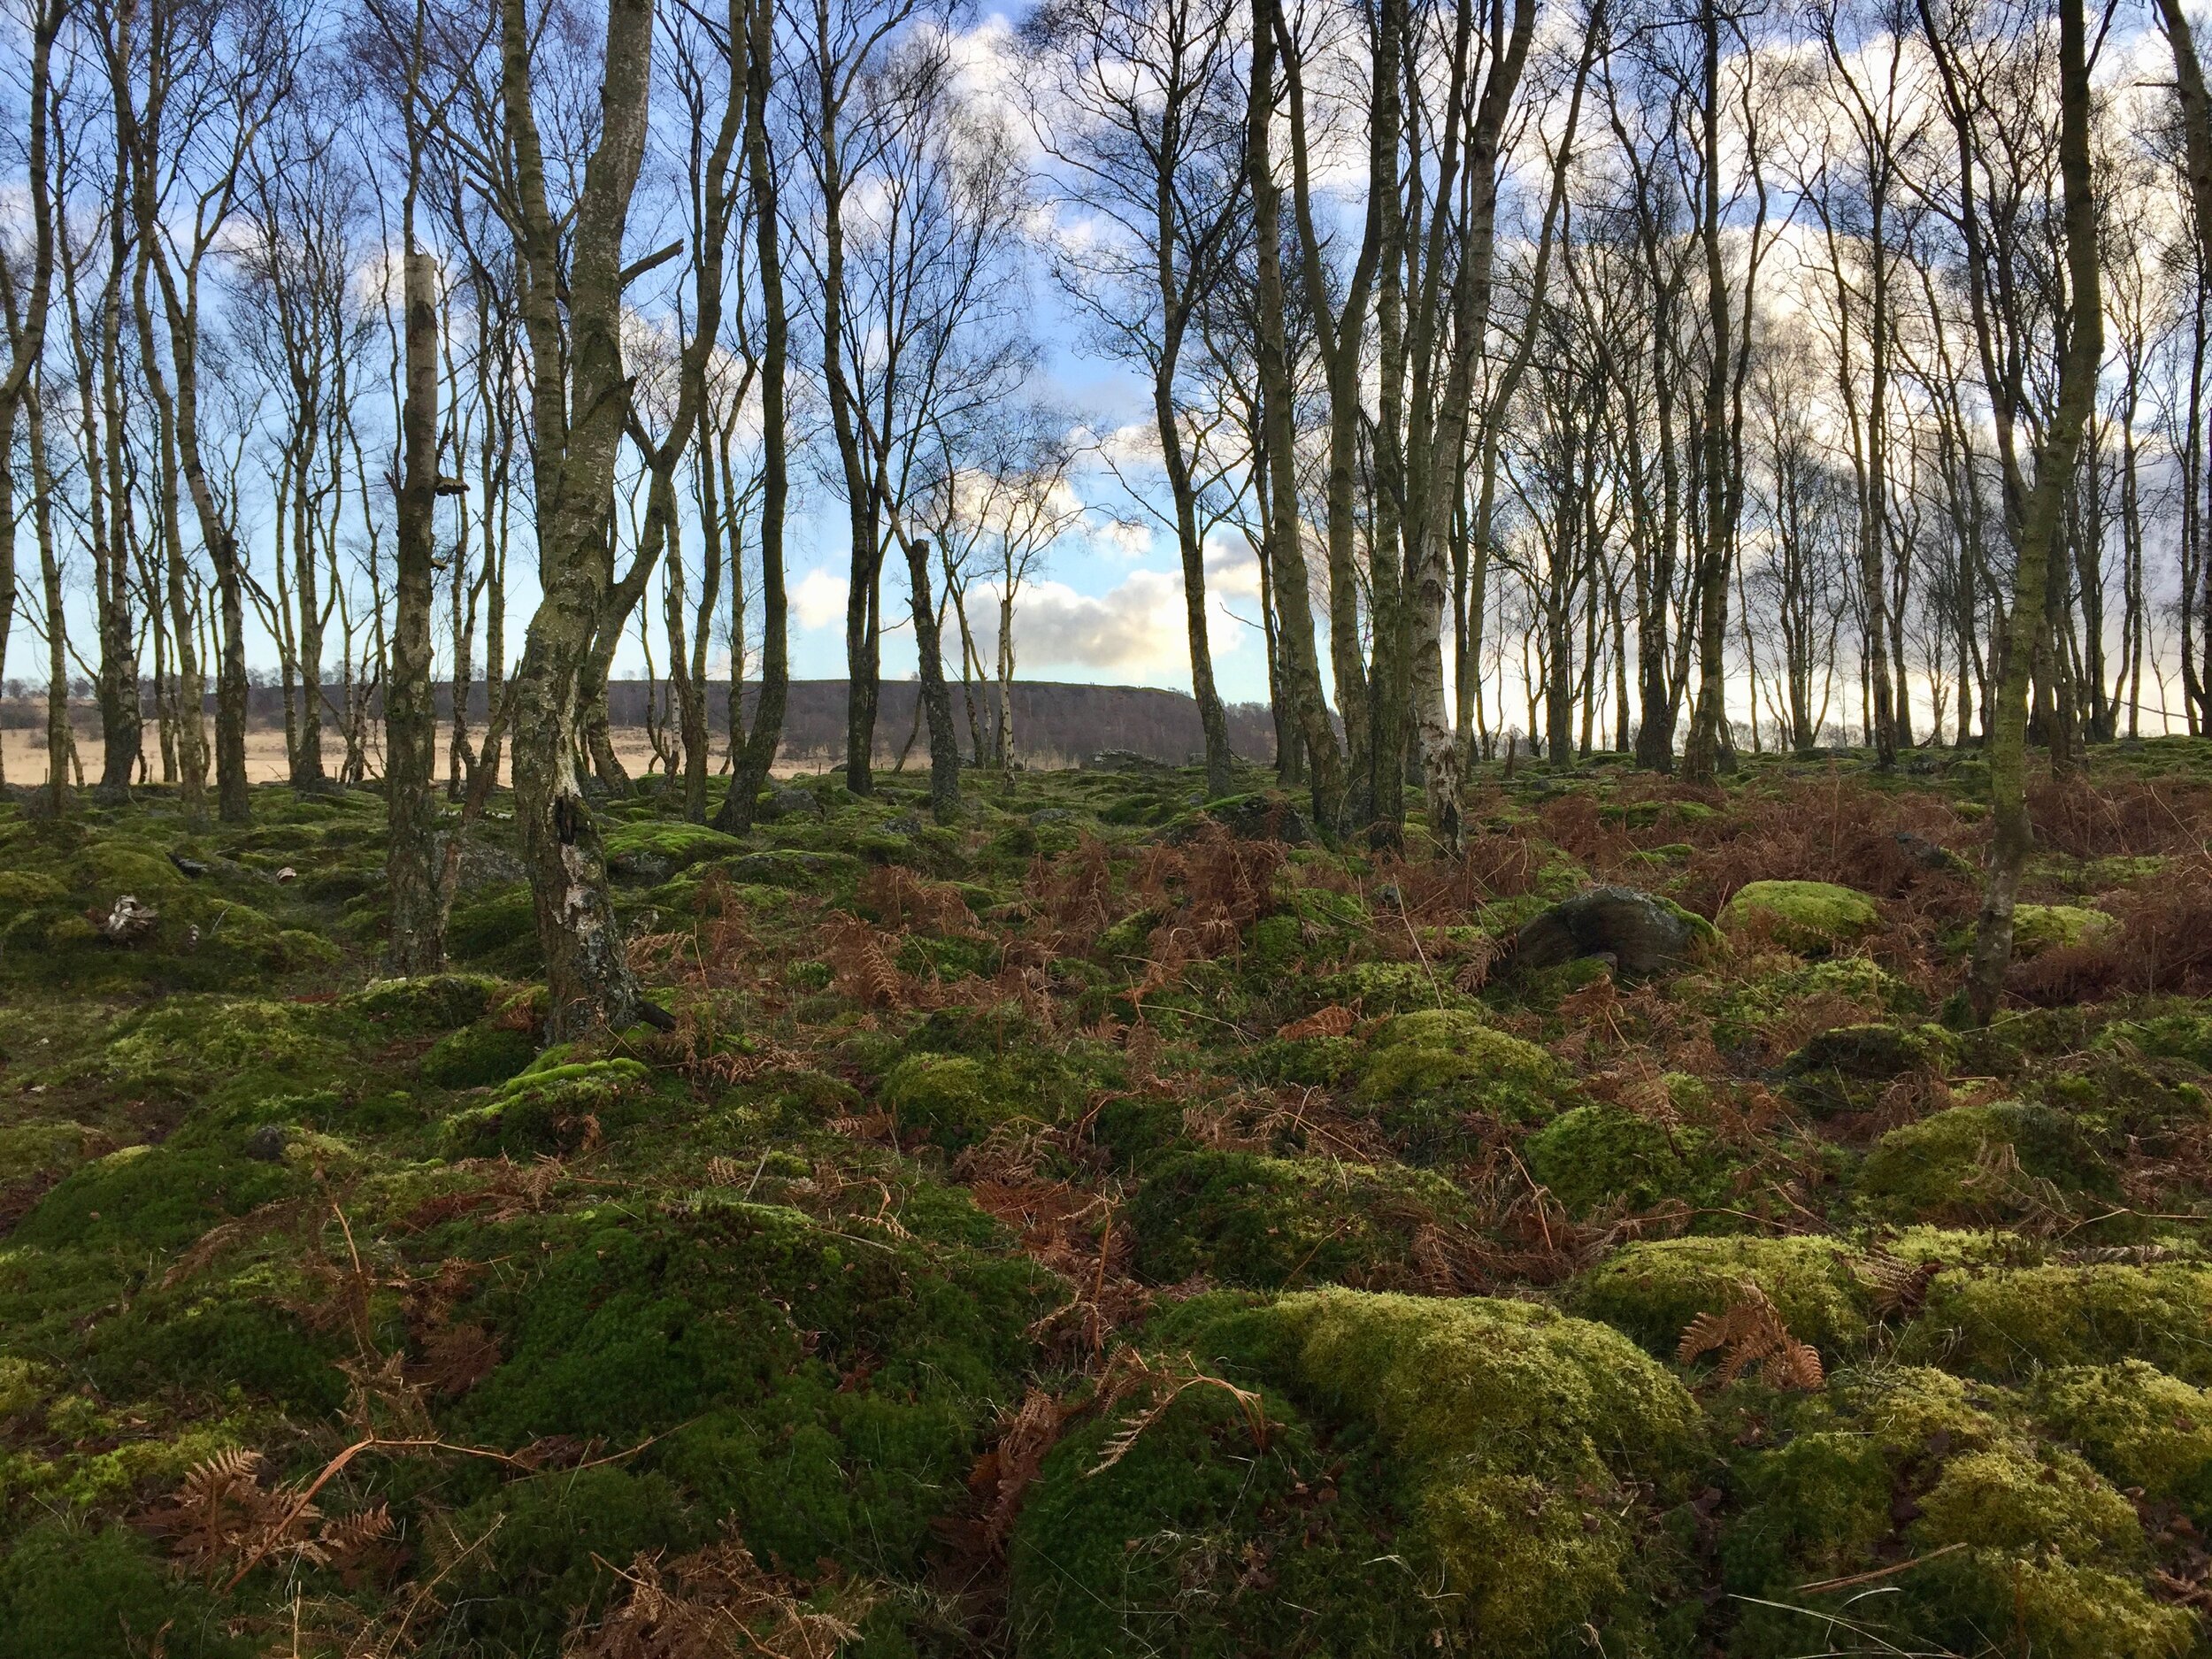  The birch woodland close to the escarpment on Gardom’s Edge. The ground is full of moss-covered boulders and dead bracken. 